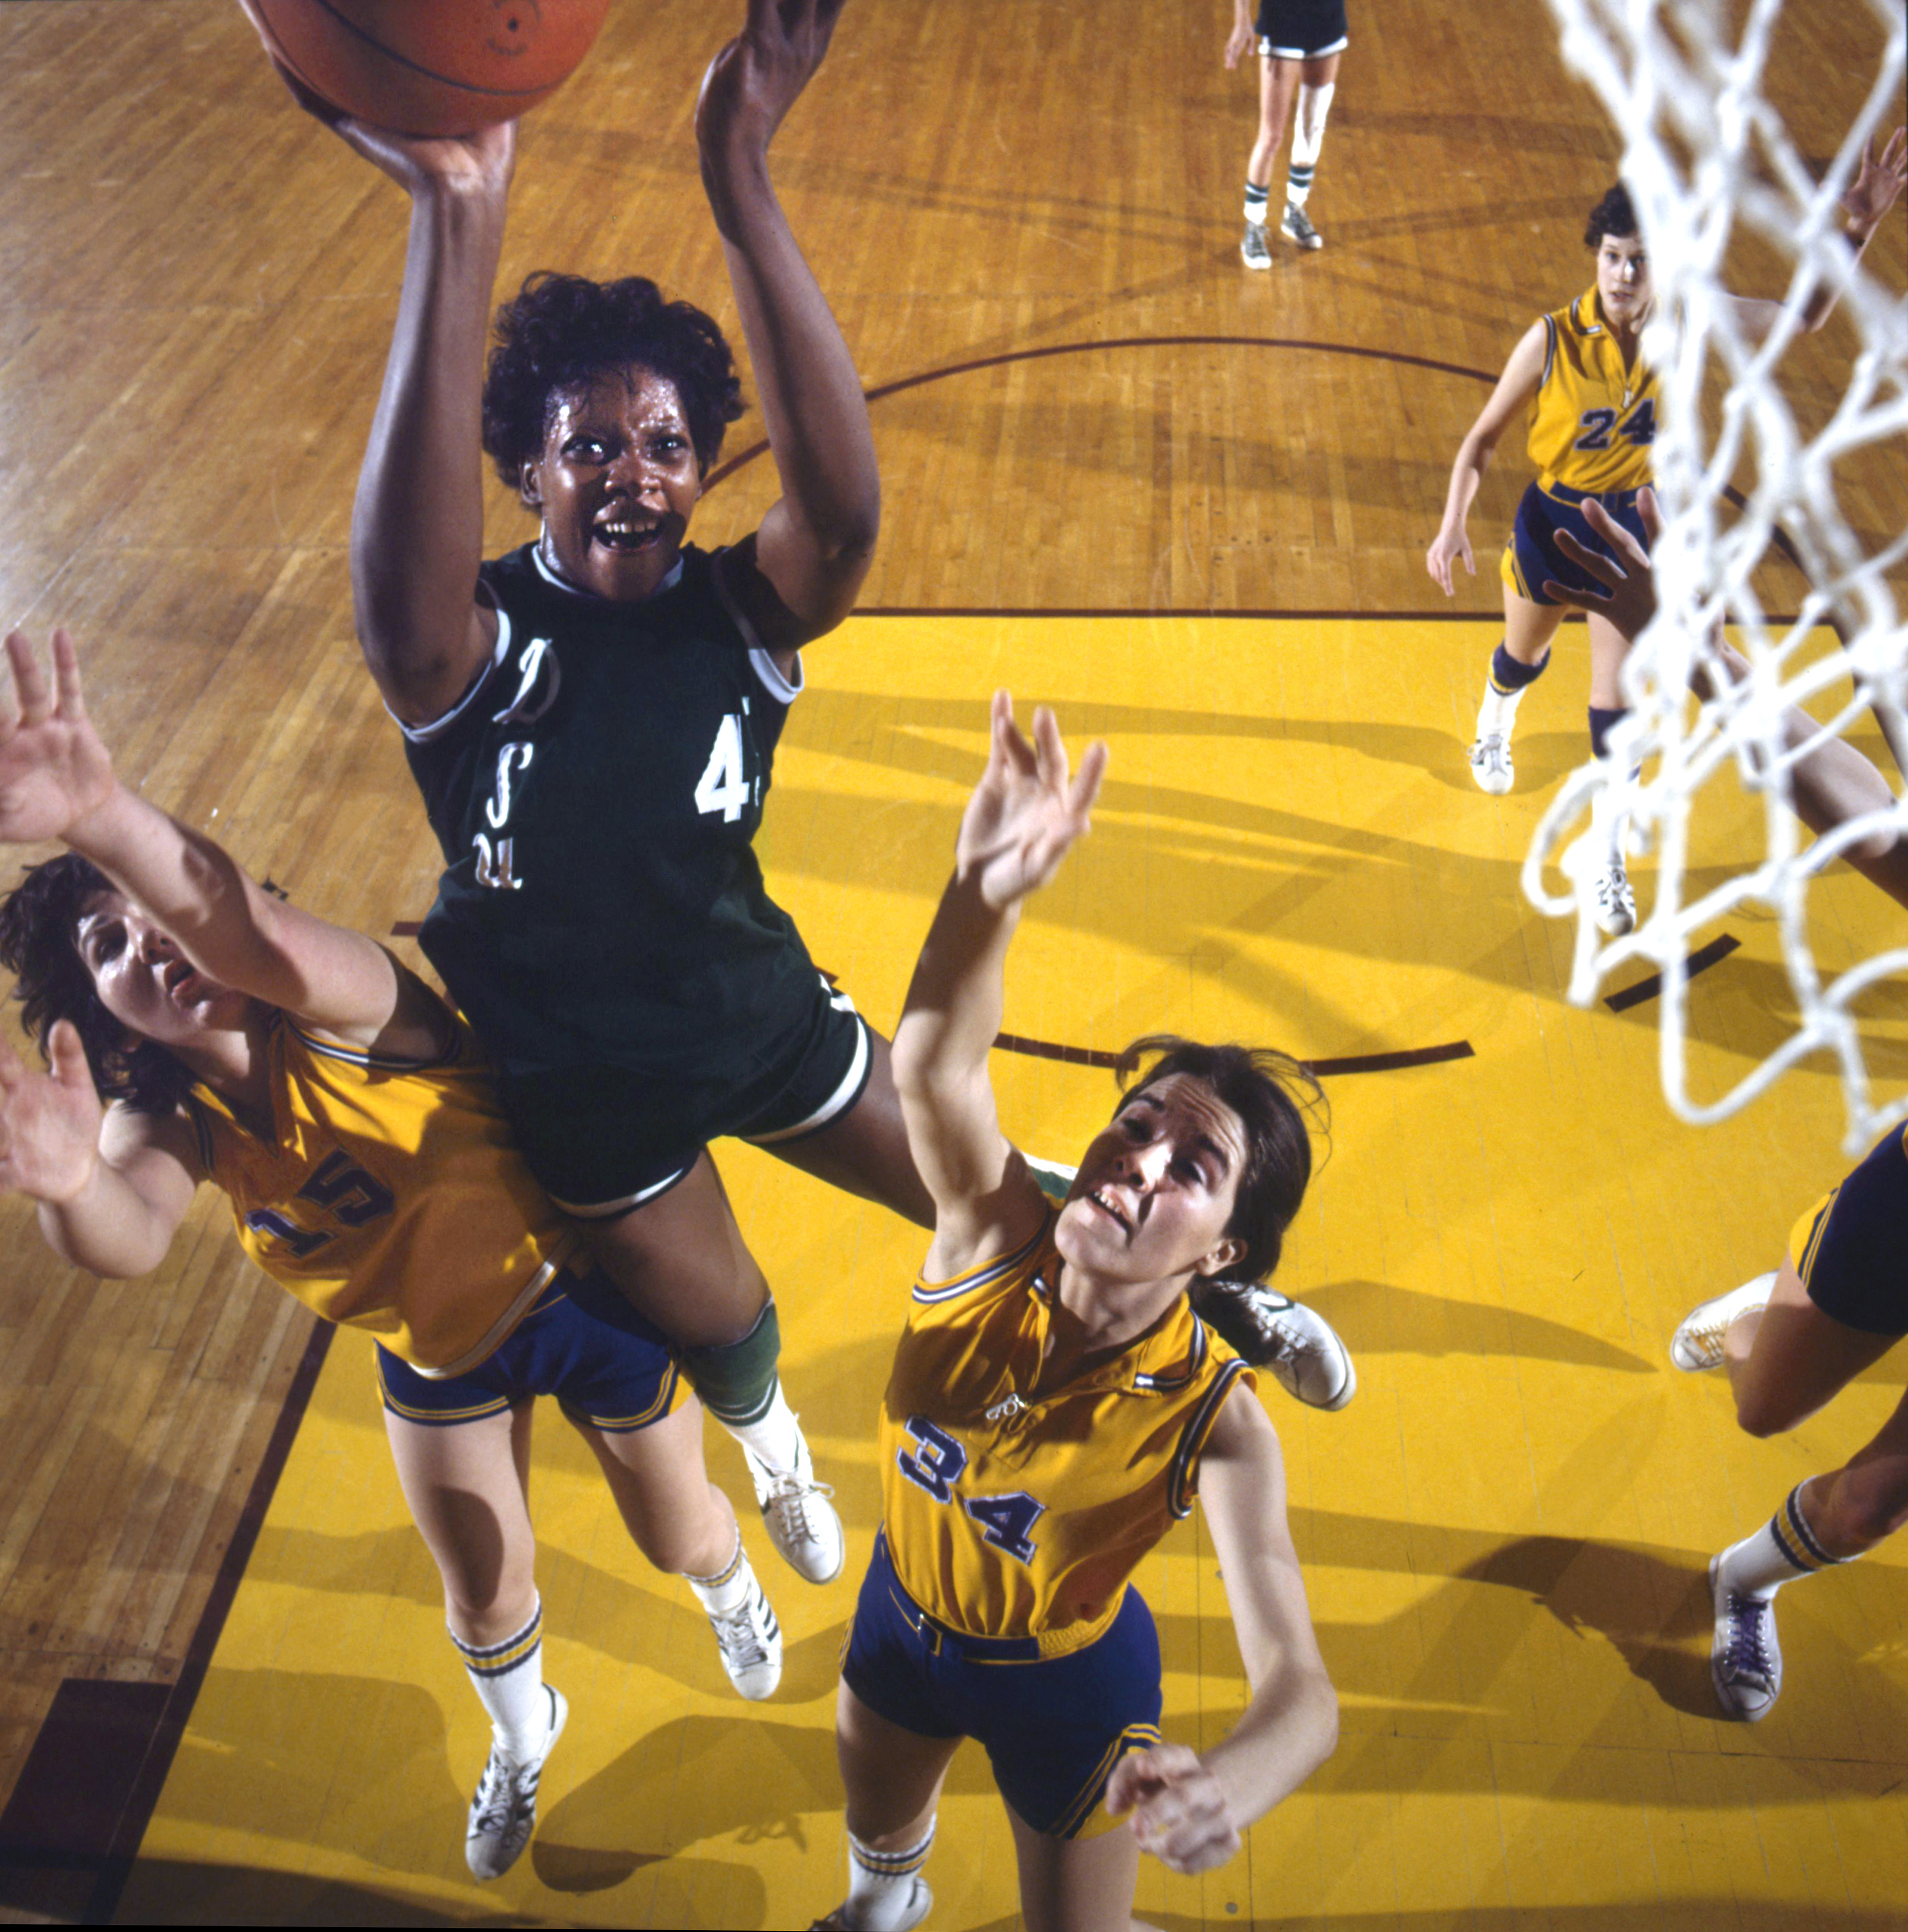 Women's Basketball Pioneer Lusia Harris, Who Was Drafted by NBA Team,
Dies at 66